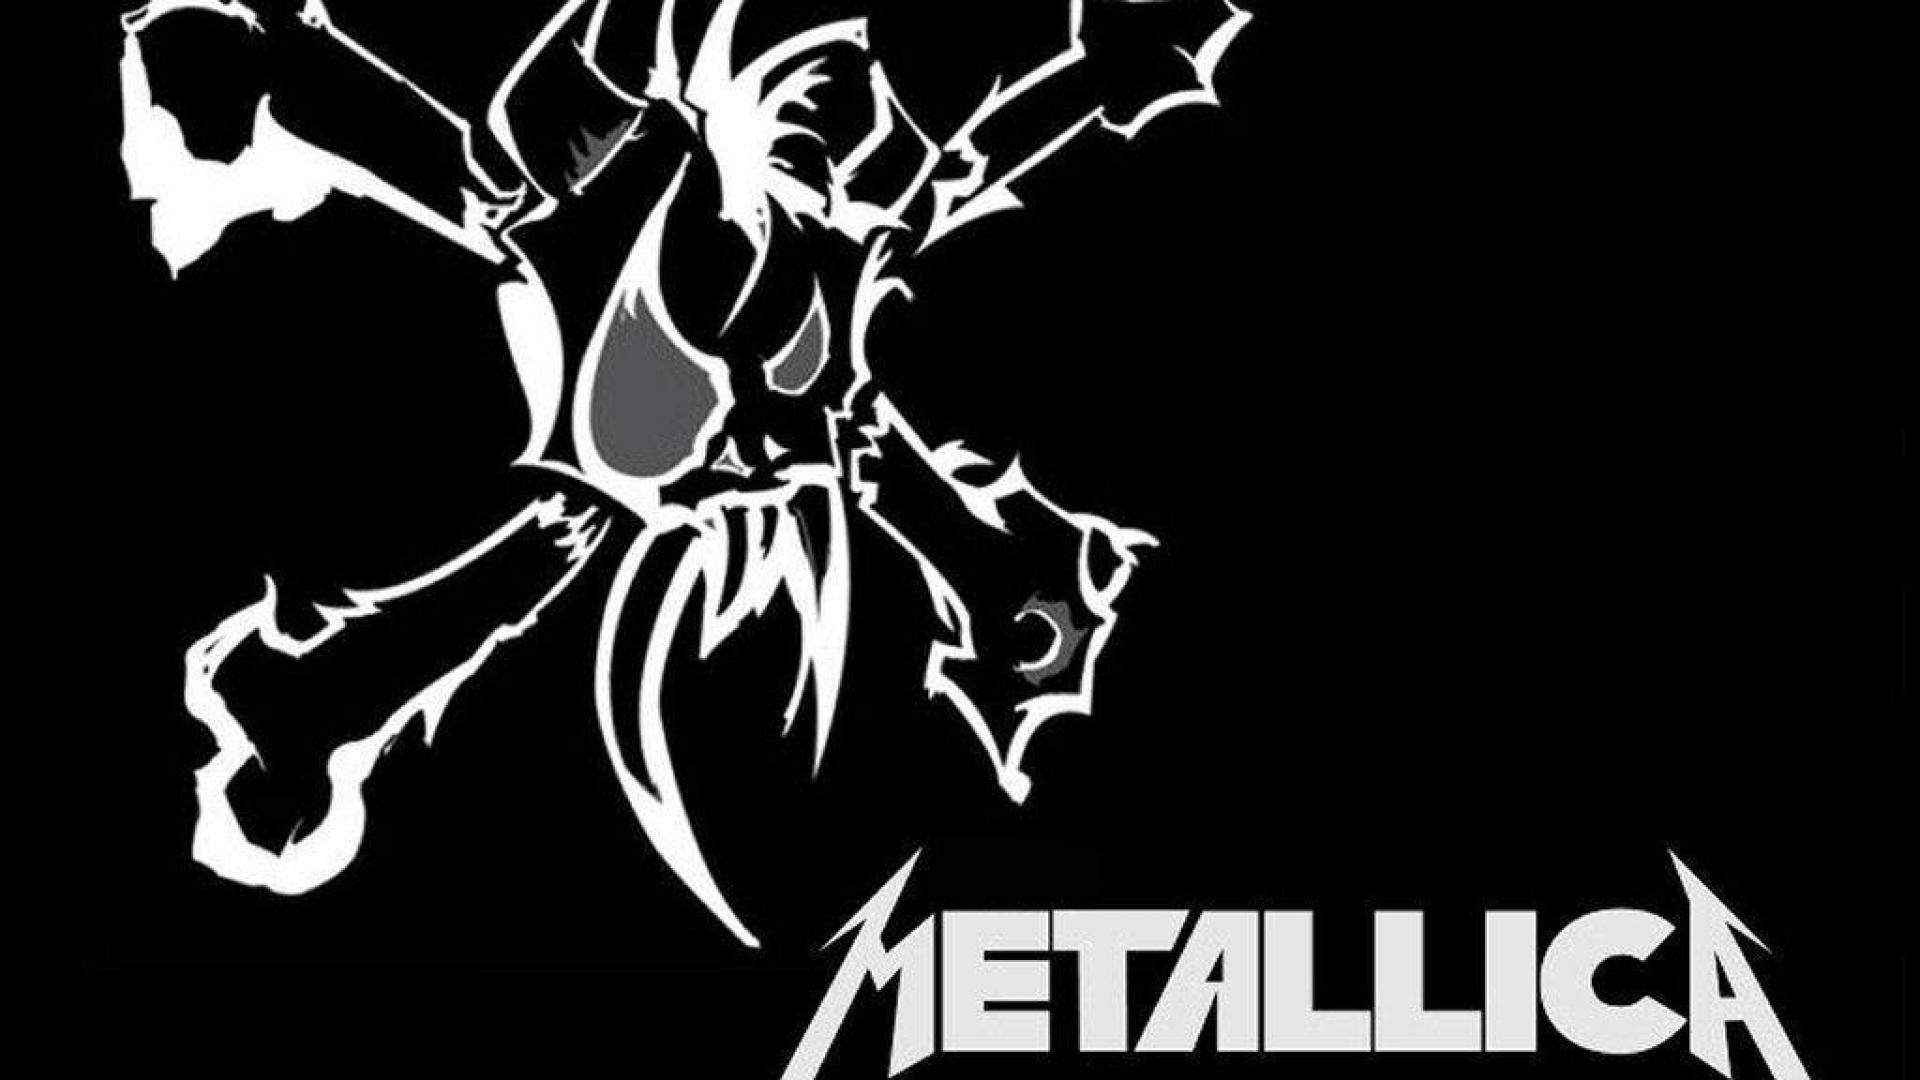 Metallica High Quality And Resolution Wallpaper On